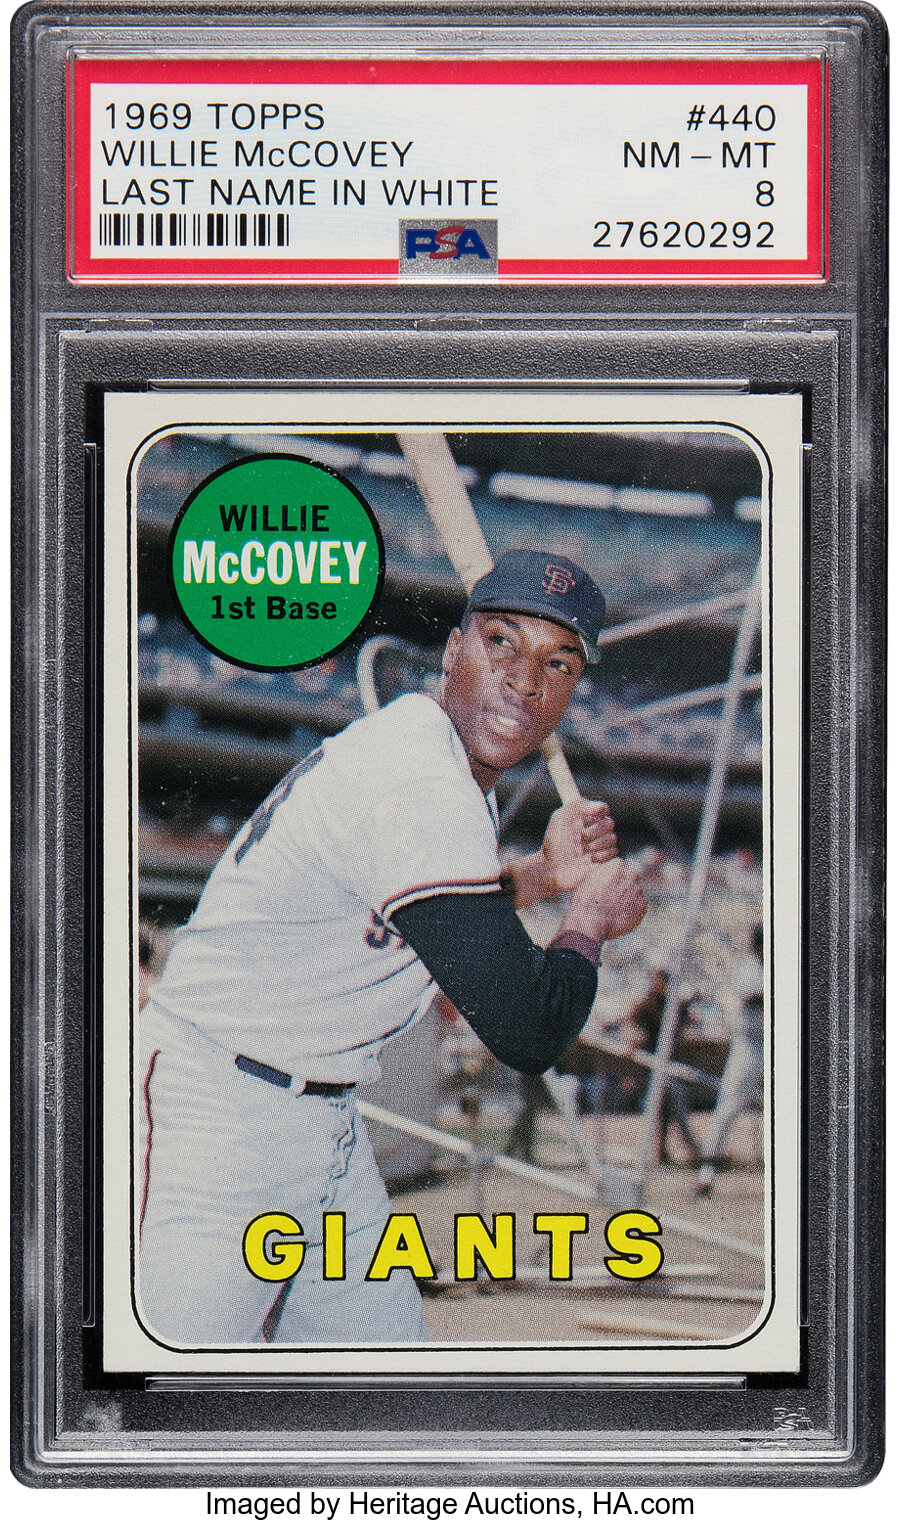 1969 Topps Willie McCovey (Last Name In White) #440 PSA NM-MT 8 - Only One Higher!